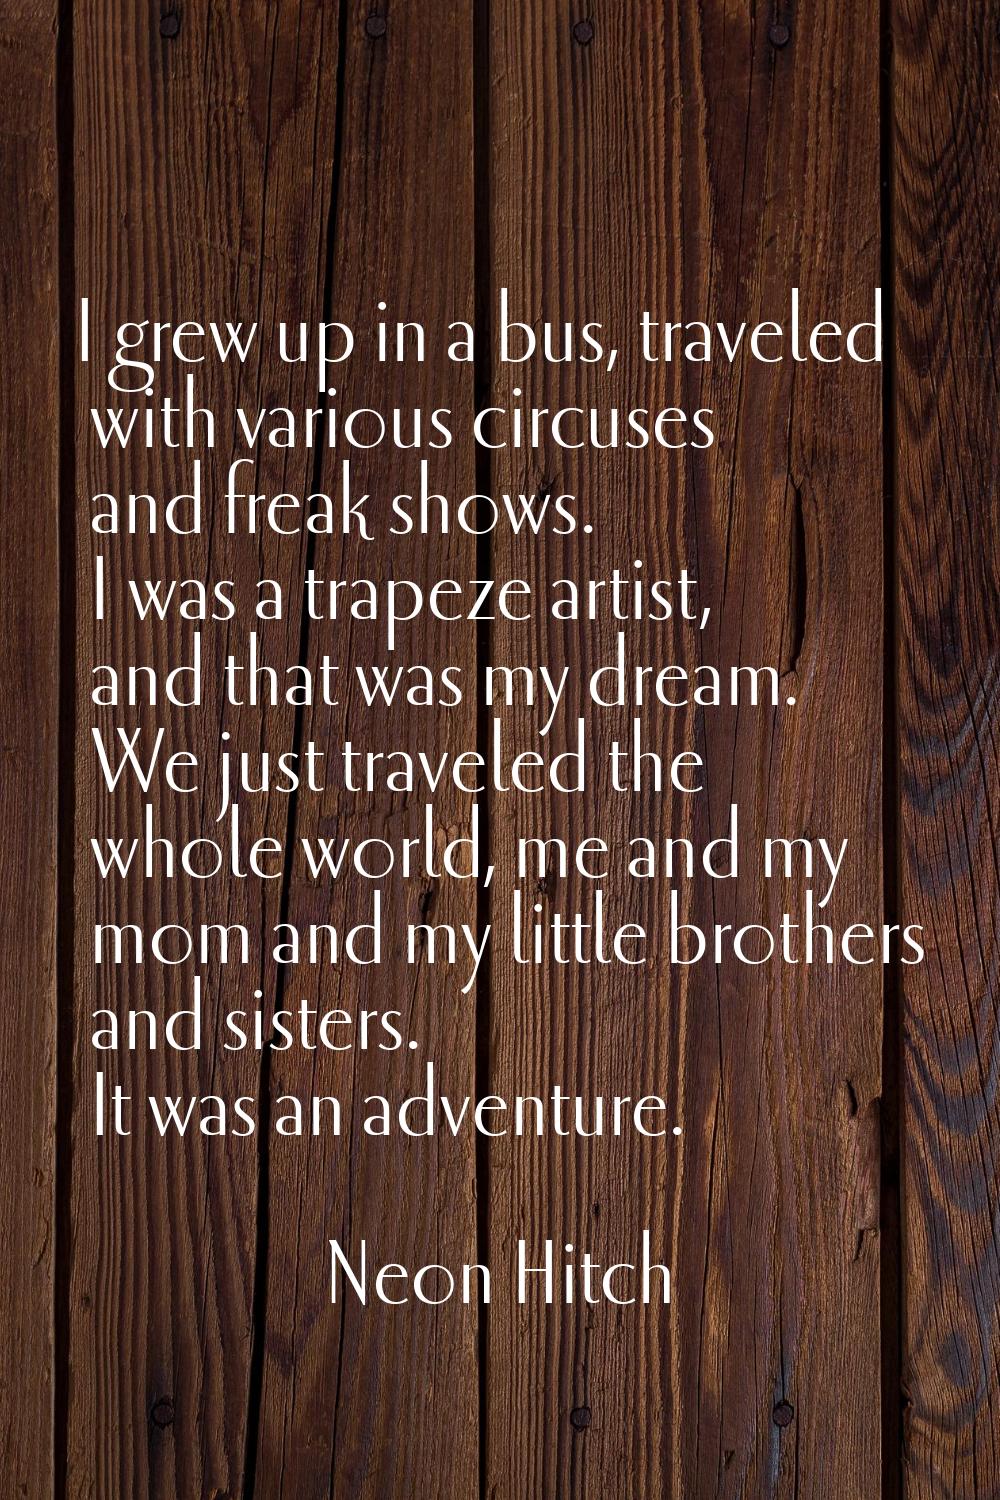 I grew up in a bus, traveled with various circuses and freak shows. I was a trapeze artist, and tha